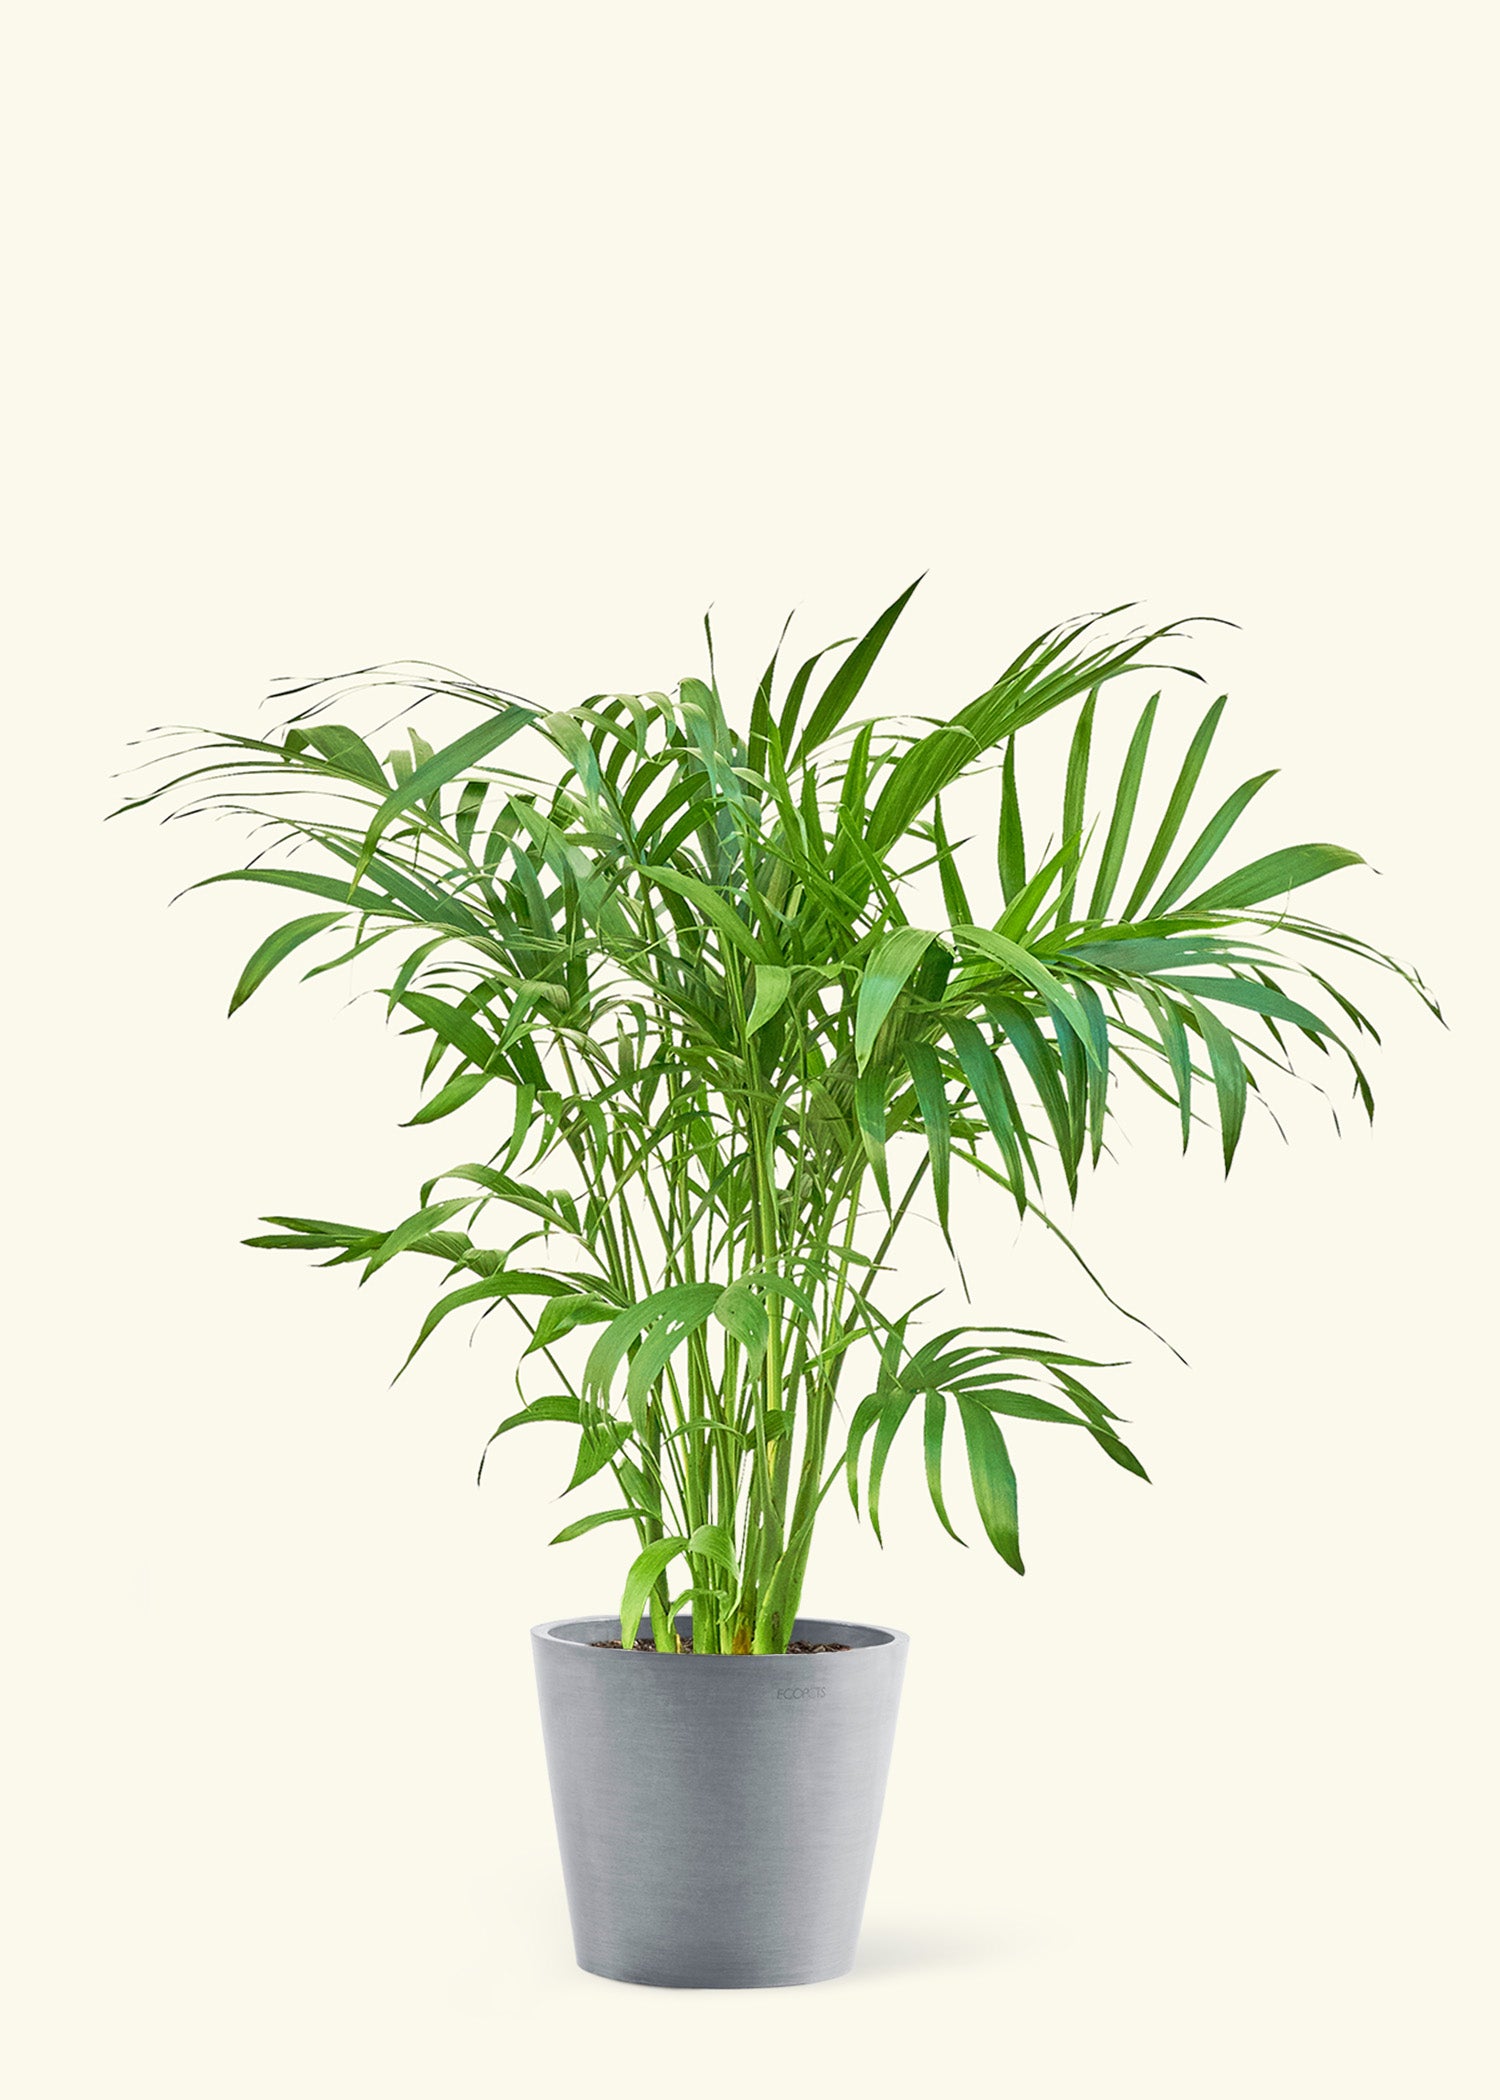 Large Bamboo Palm Plant in a gray stone pot.